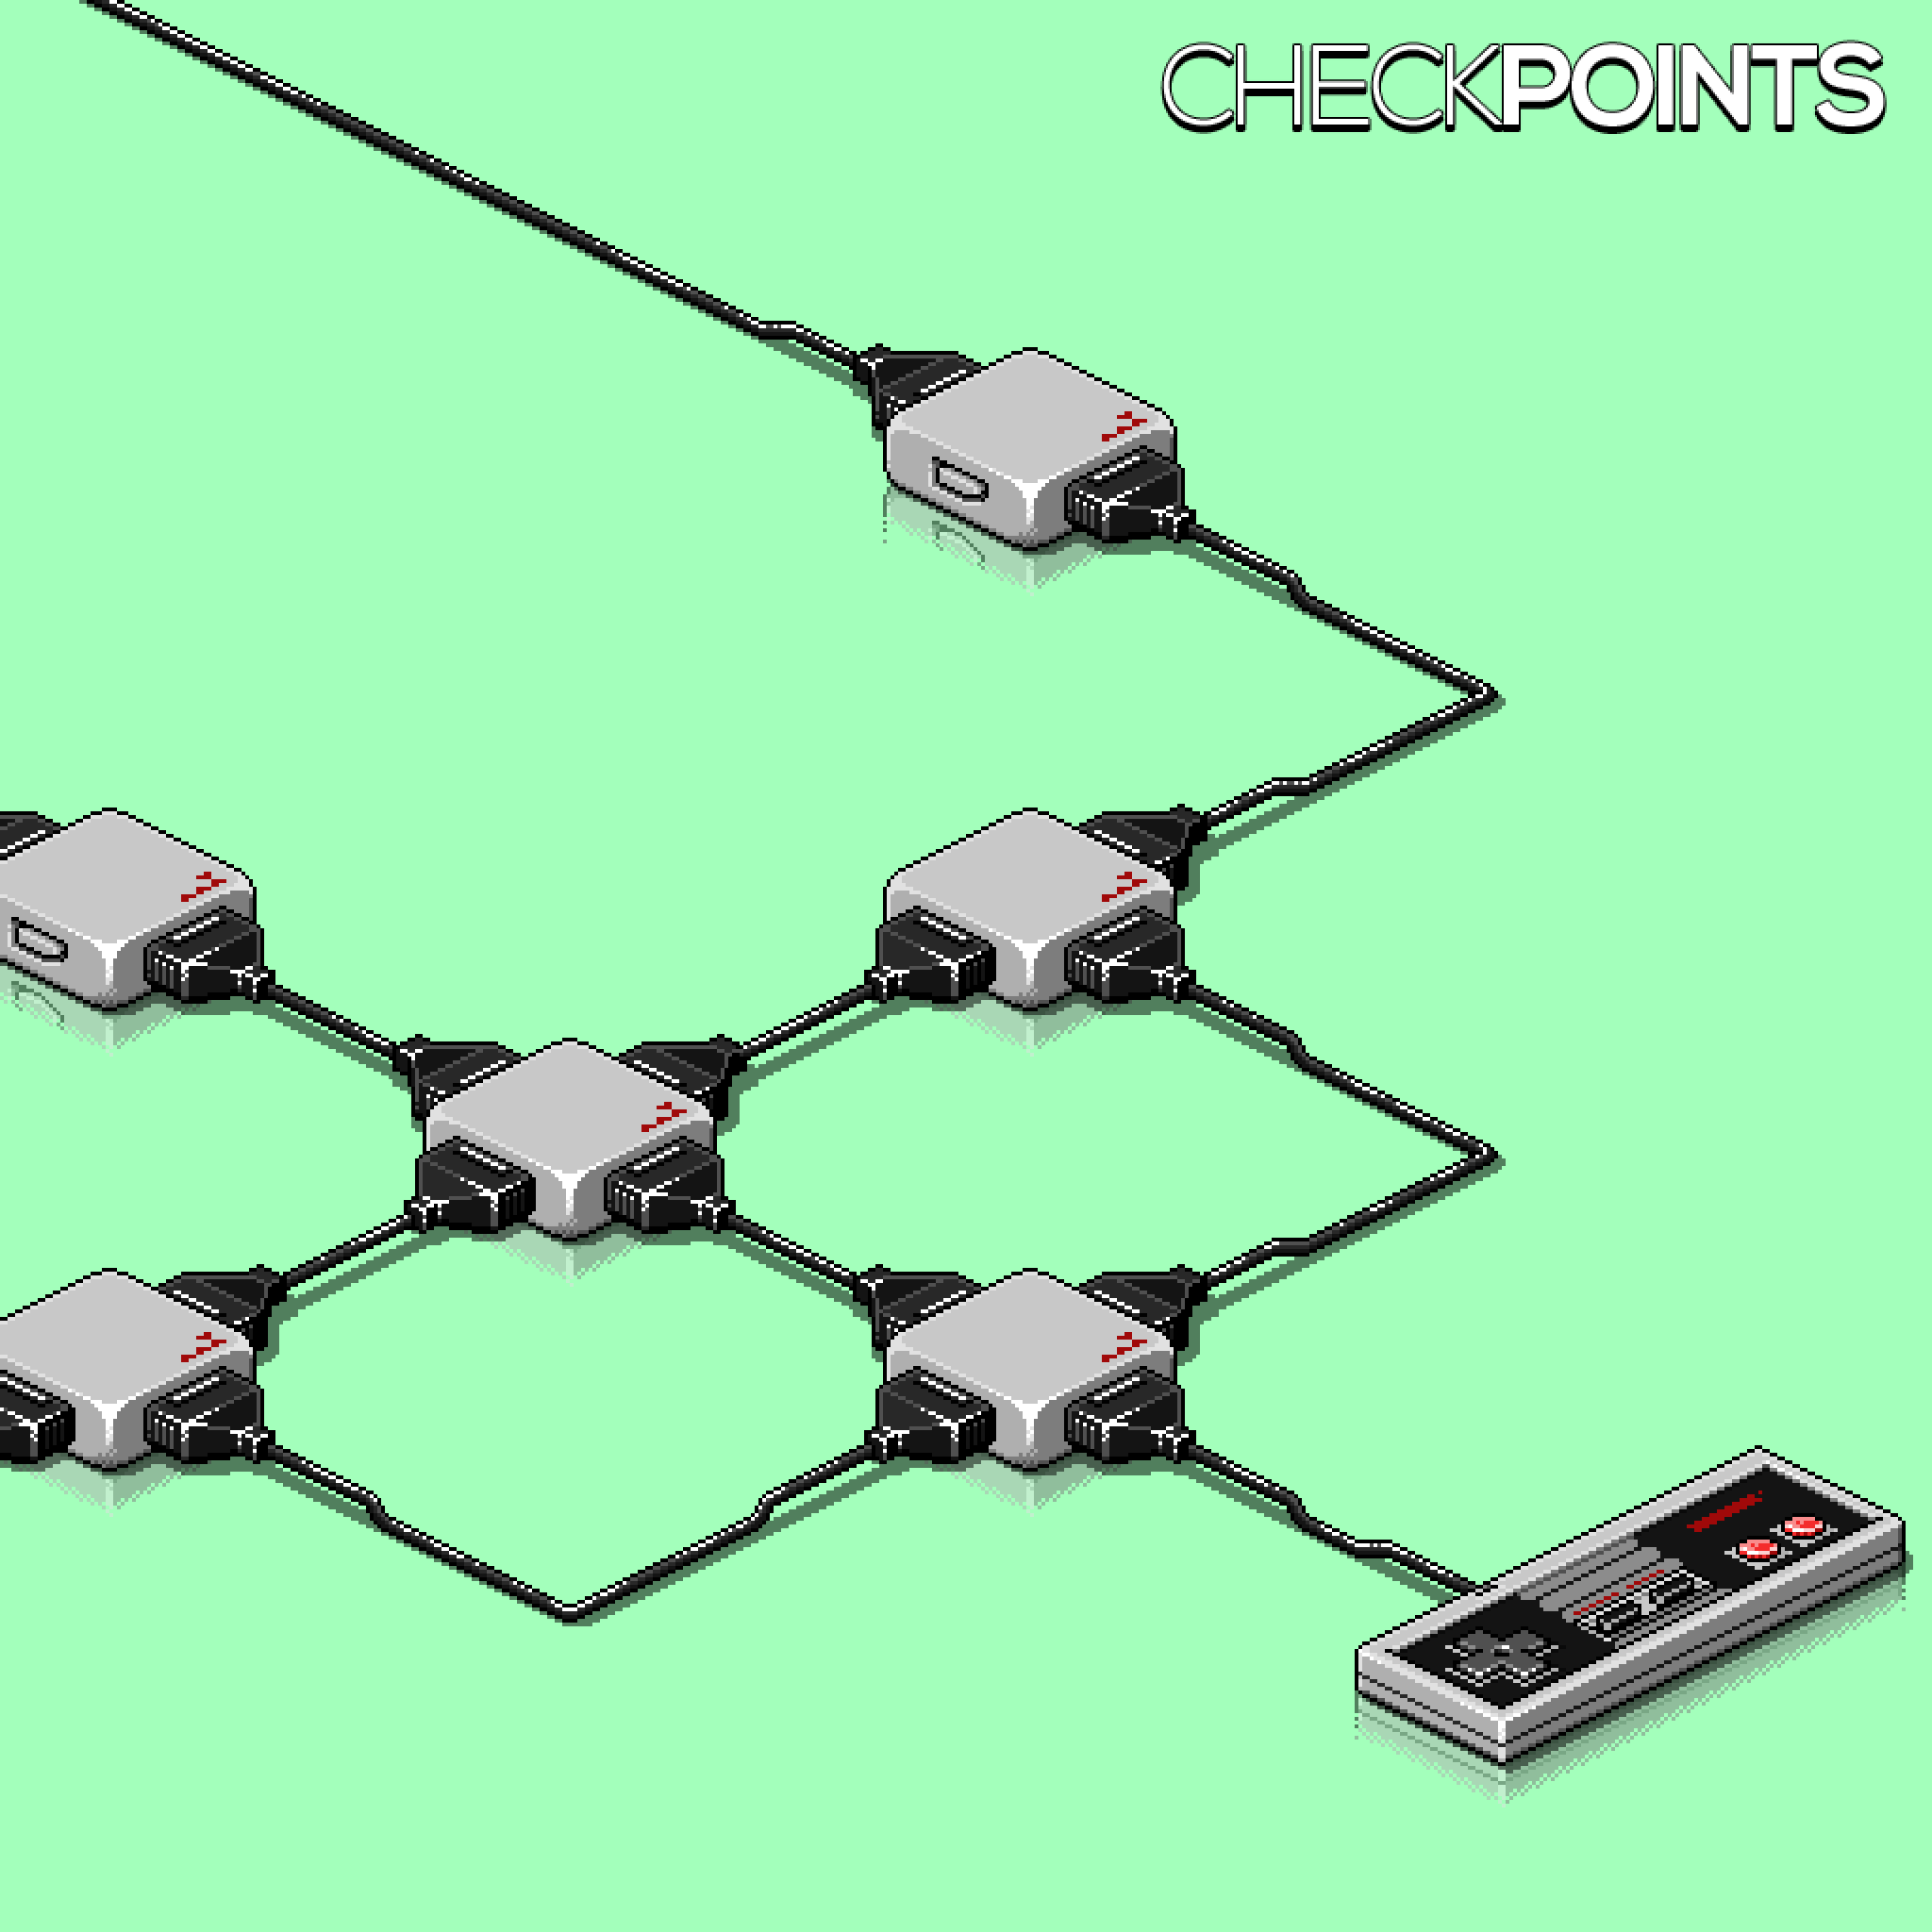 checkpoints nes 2048 variation example.png